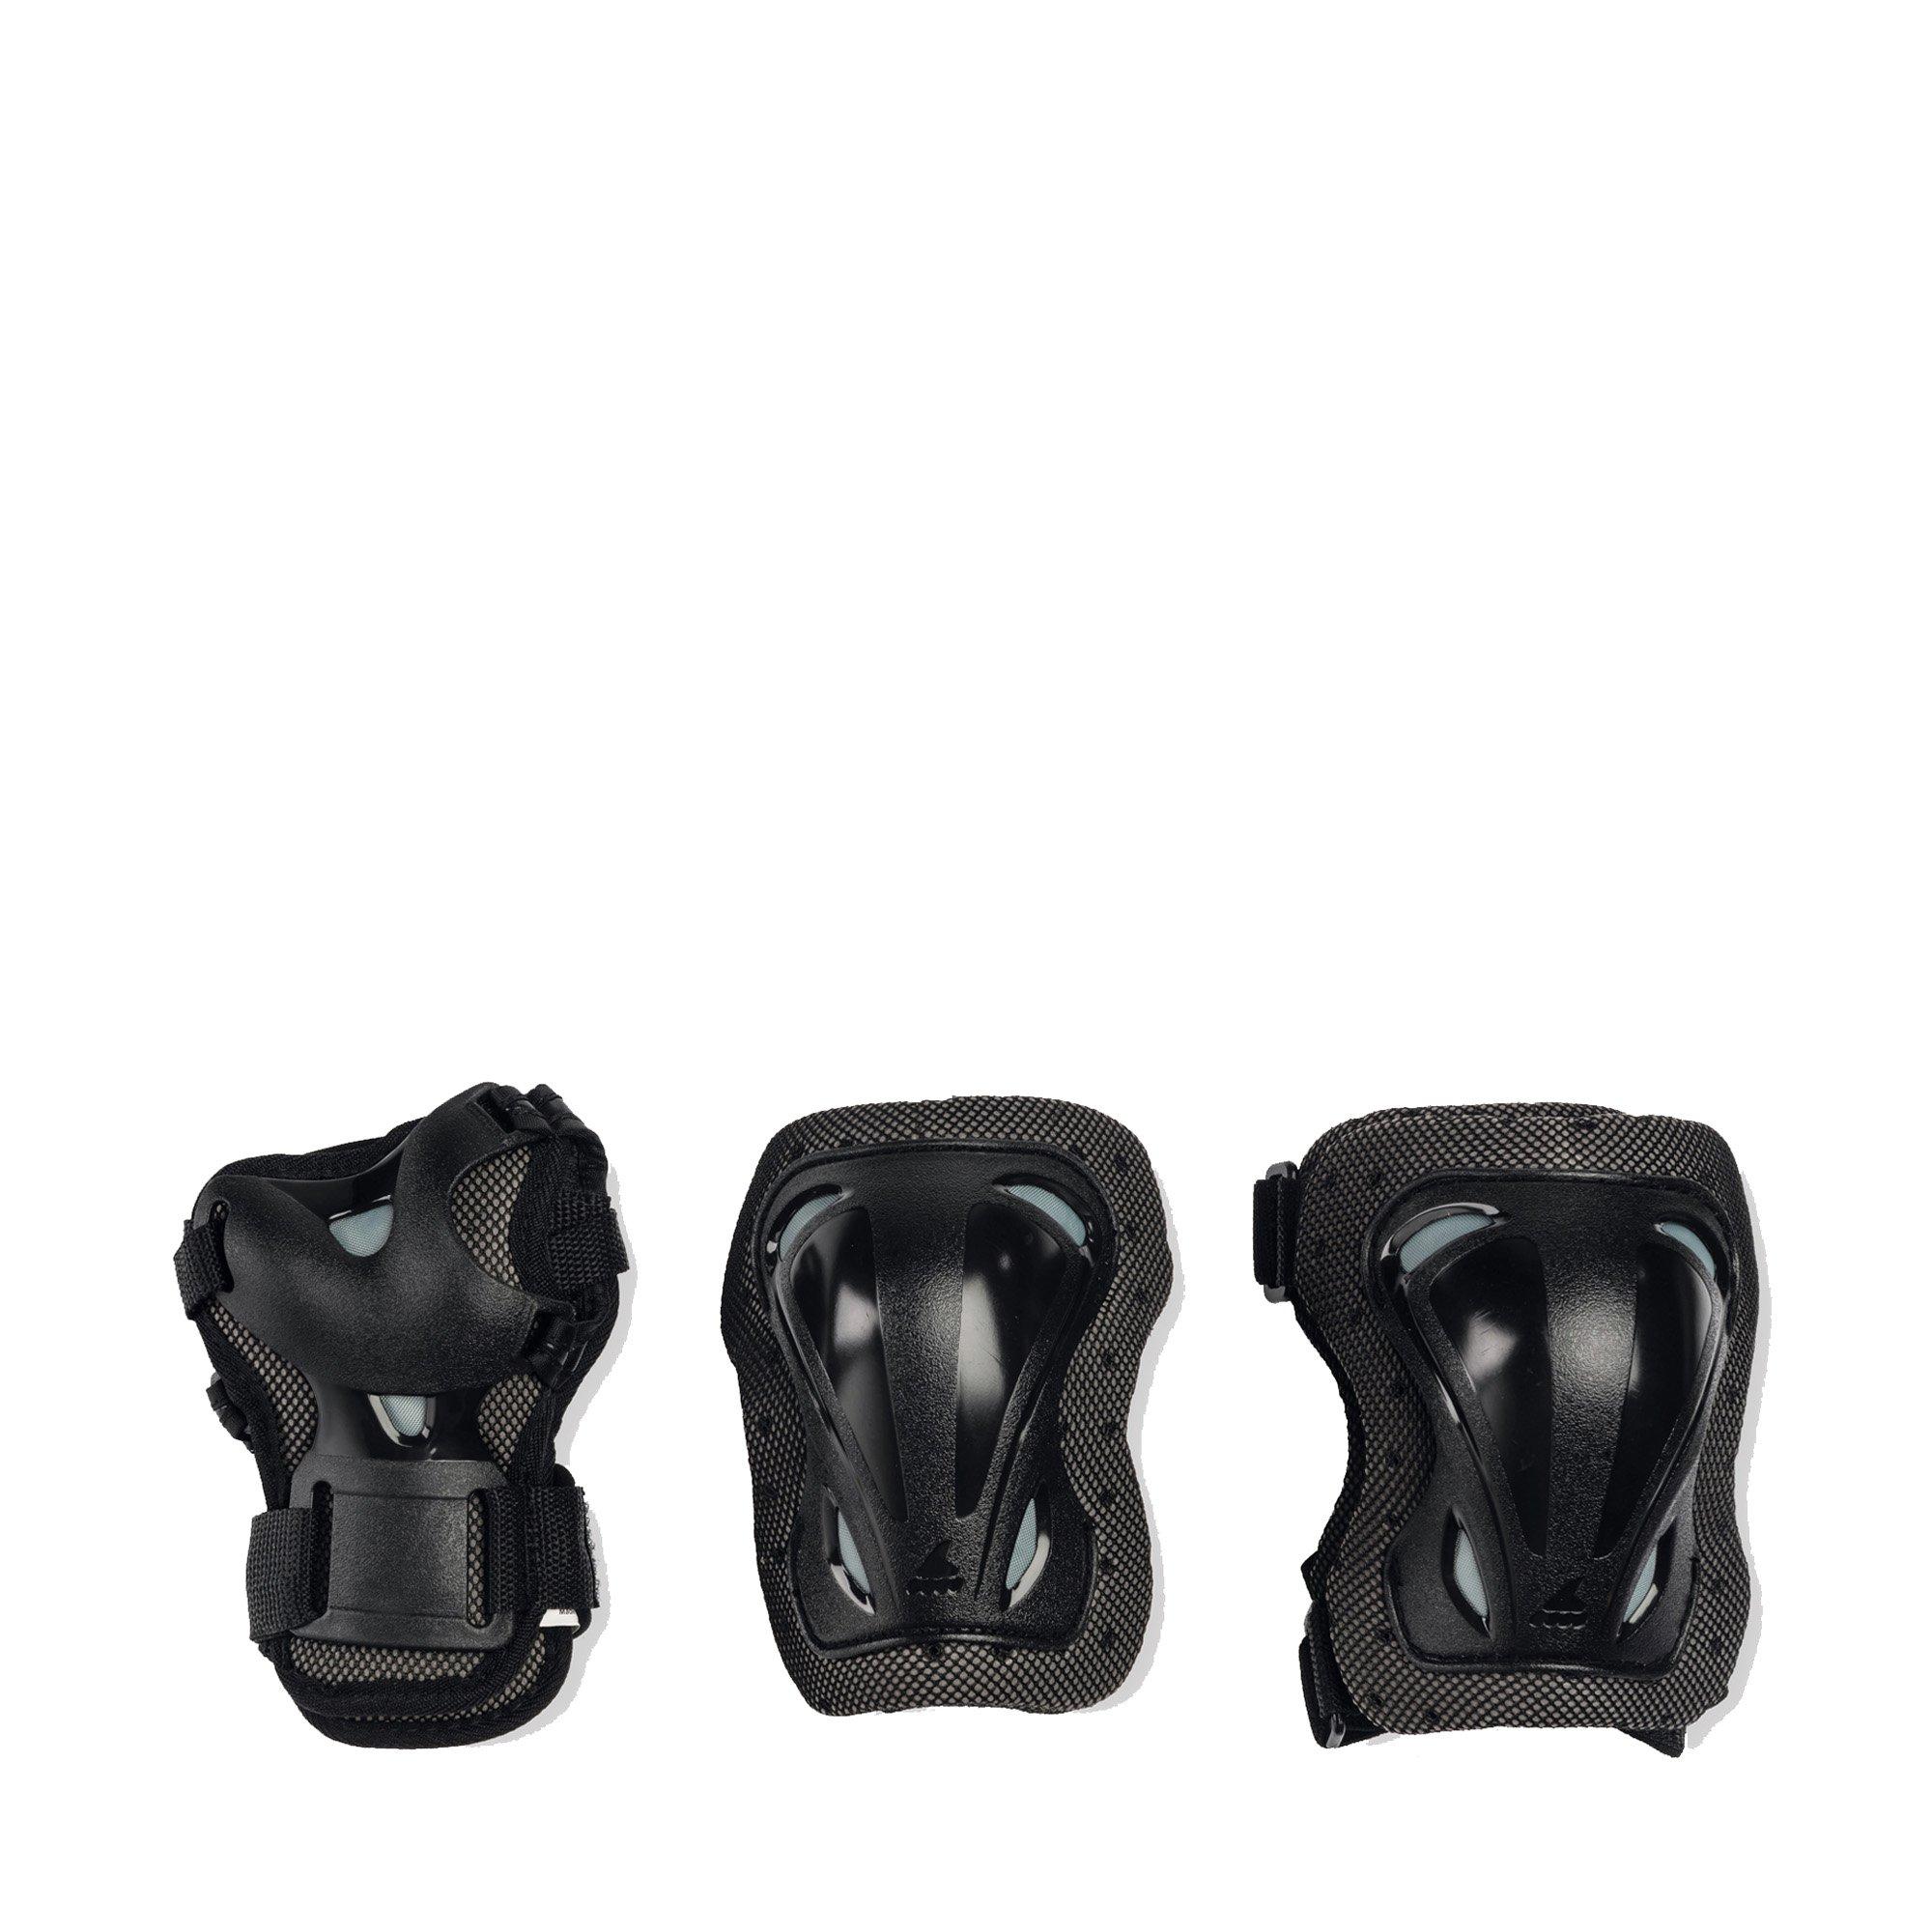 ROLLERBLADE Micro Combo ensemble Rollers 